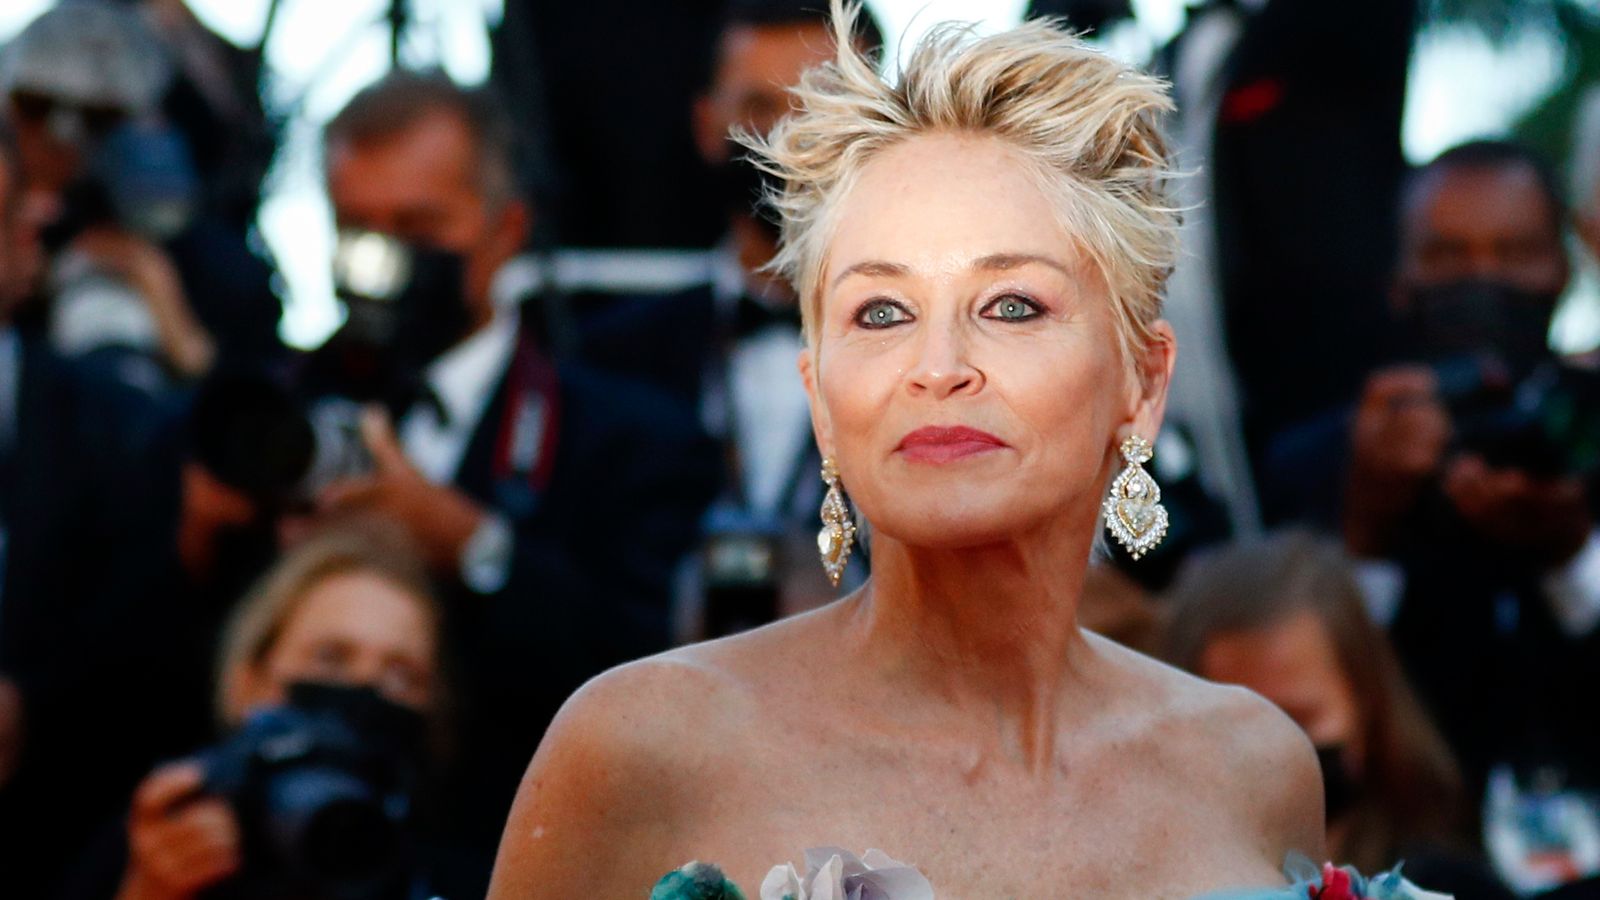 Sharon Stone pays tribute to 11-month-old nephew following his death